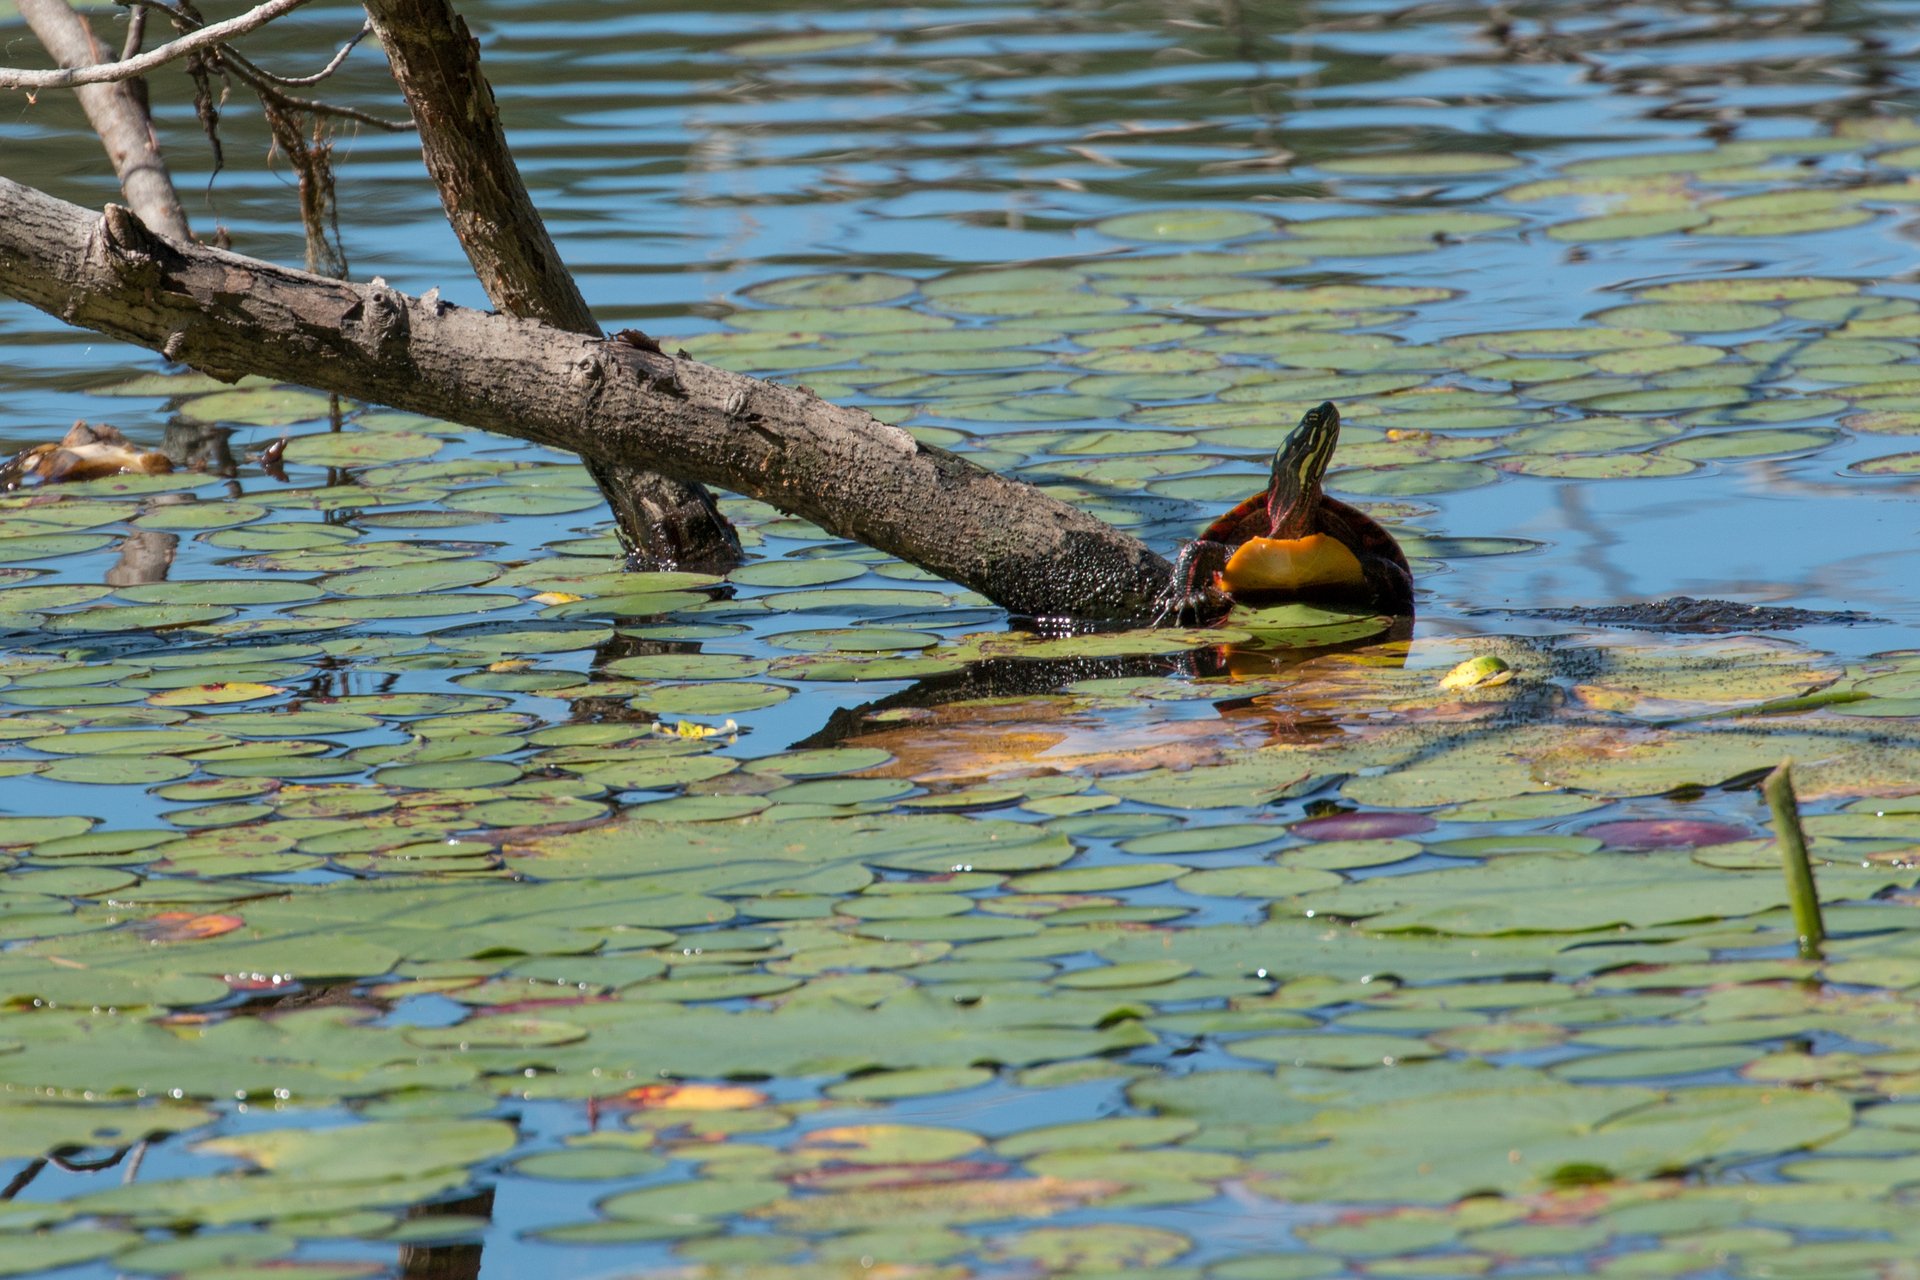 A turtle half in the lily-pad filled water and half on a log, sunbathing.